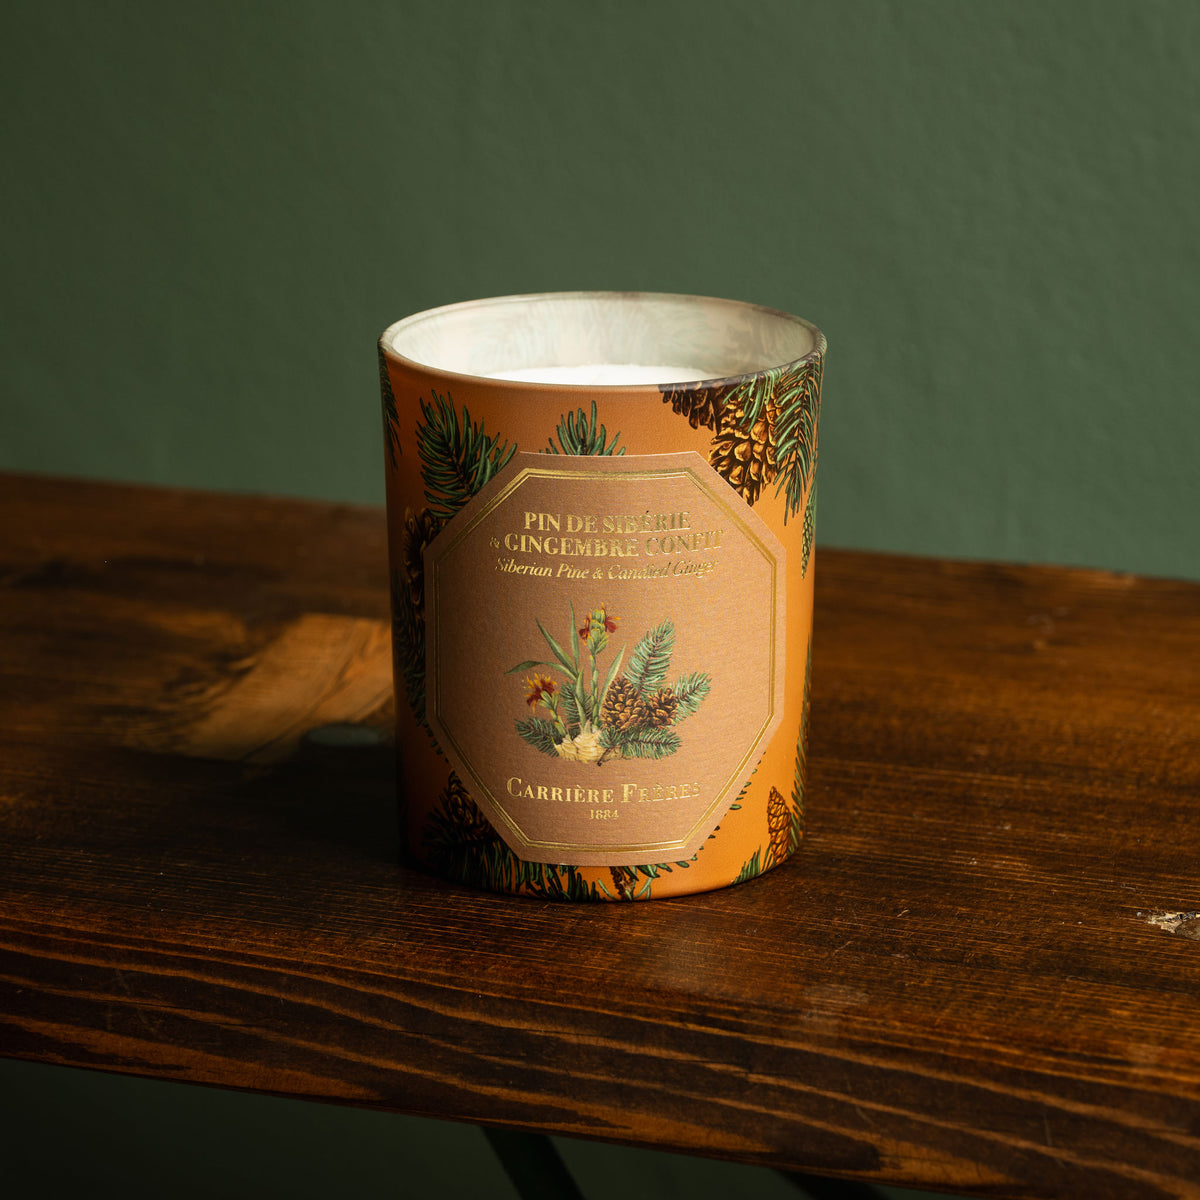 Carriere Freres Siberian Pine & Candied Ginger scented candle